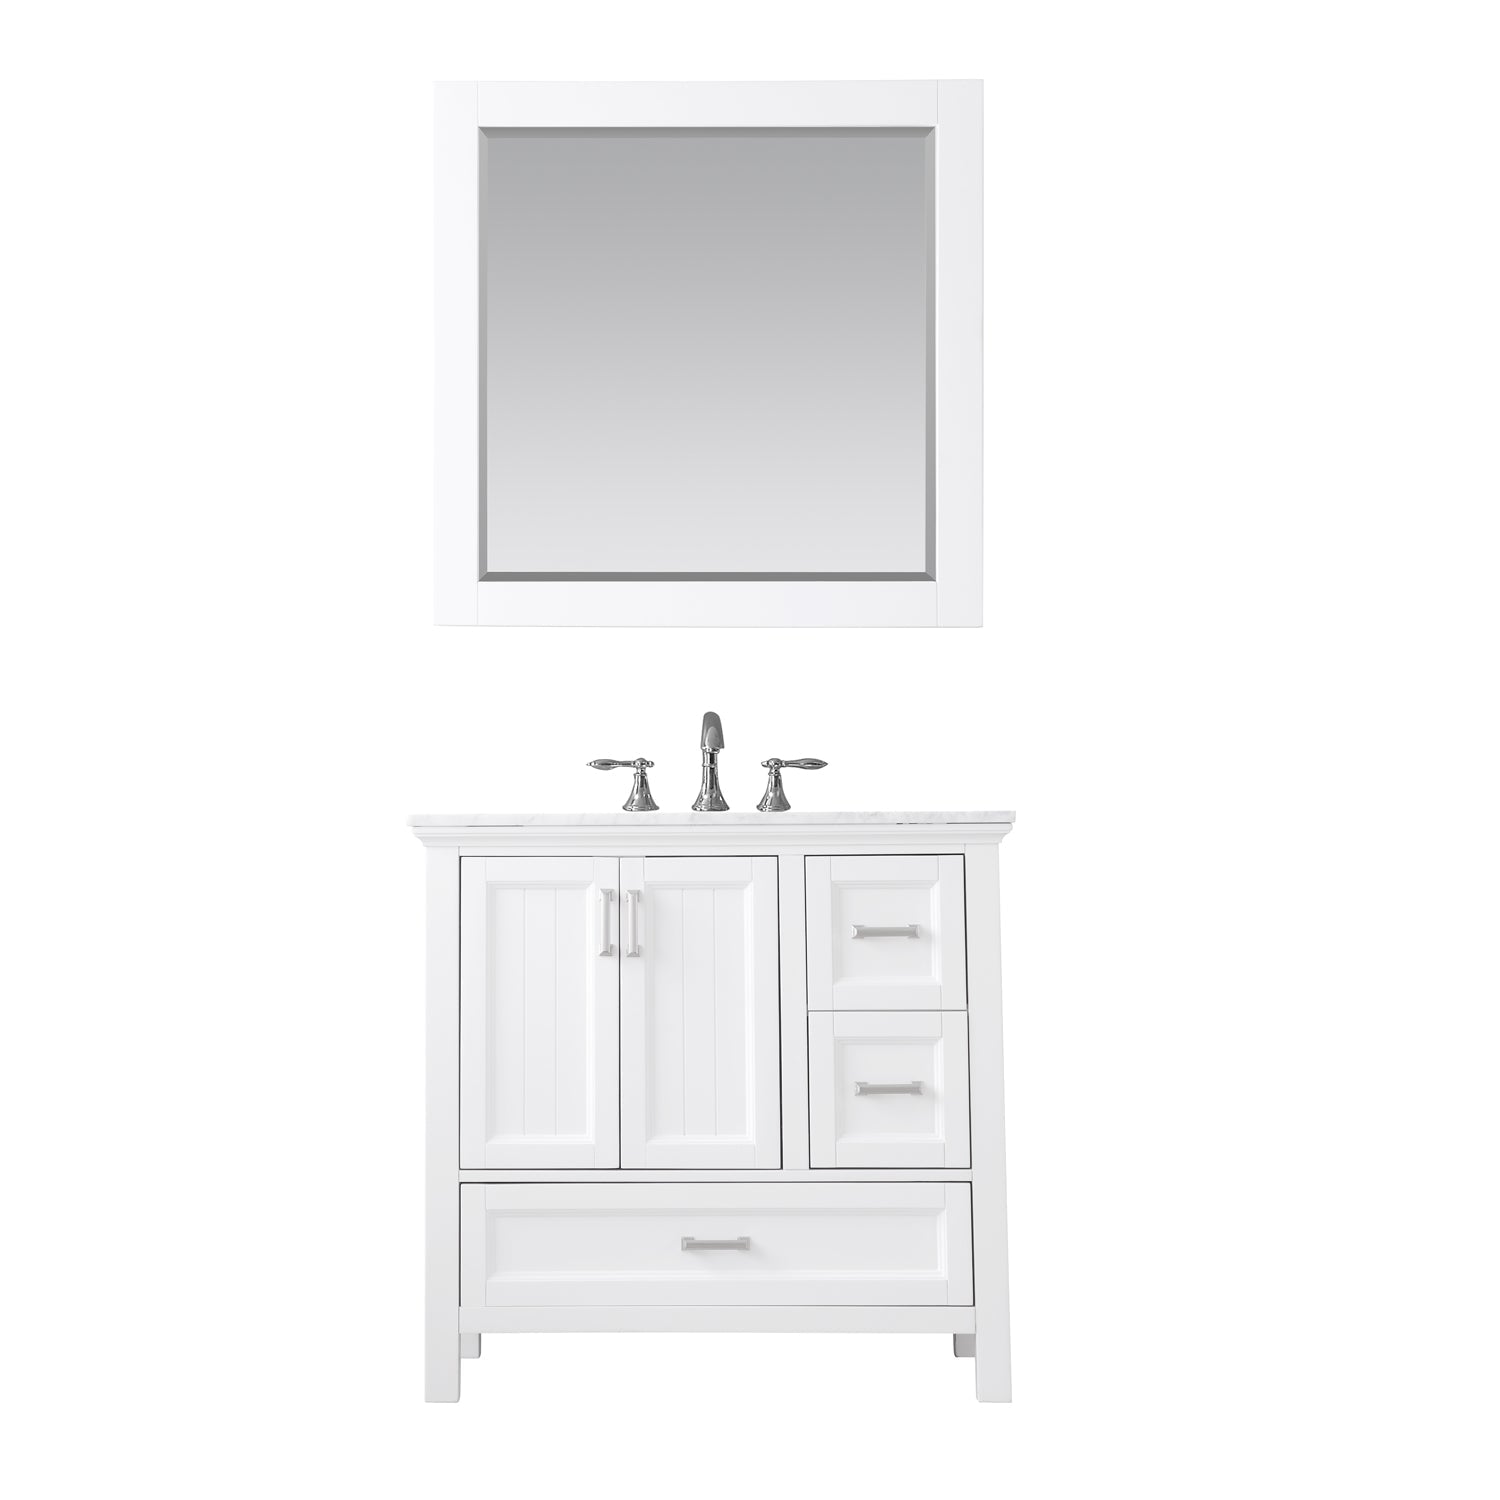 Altair Isla 36" Single Bathroom Vanity Set in White and Carrara White Marble Countertop with Mirror 538036-WH-CA - Molaix631112970815Vanity538036-WH-CA